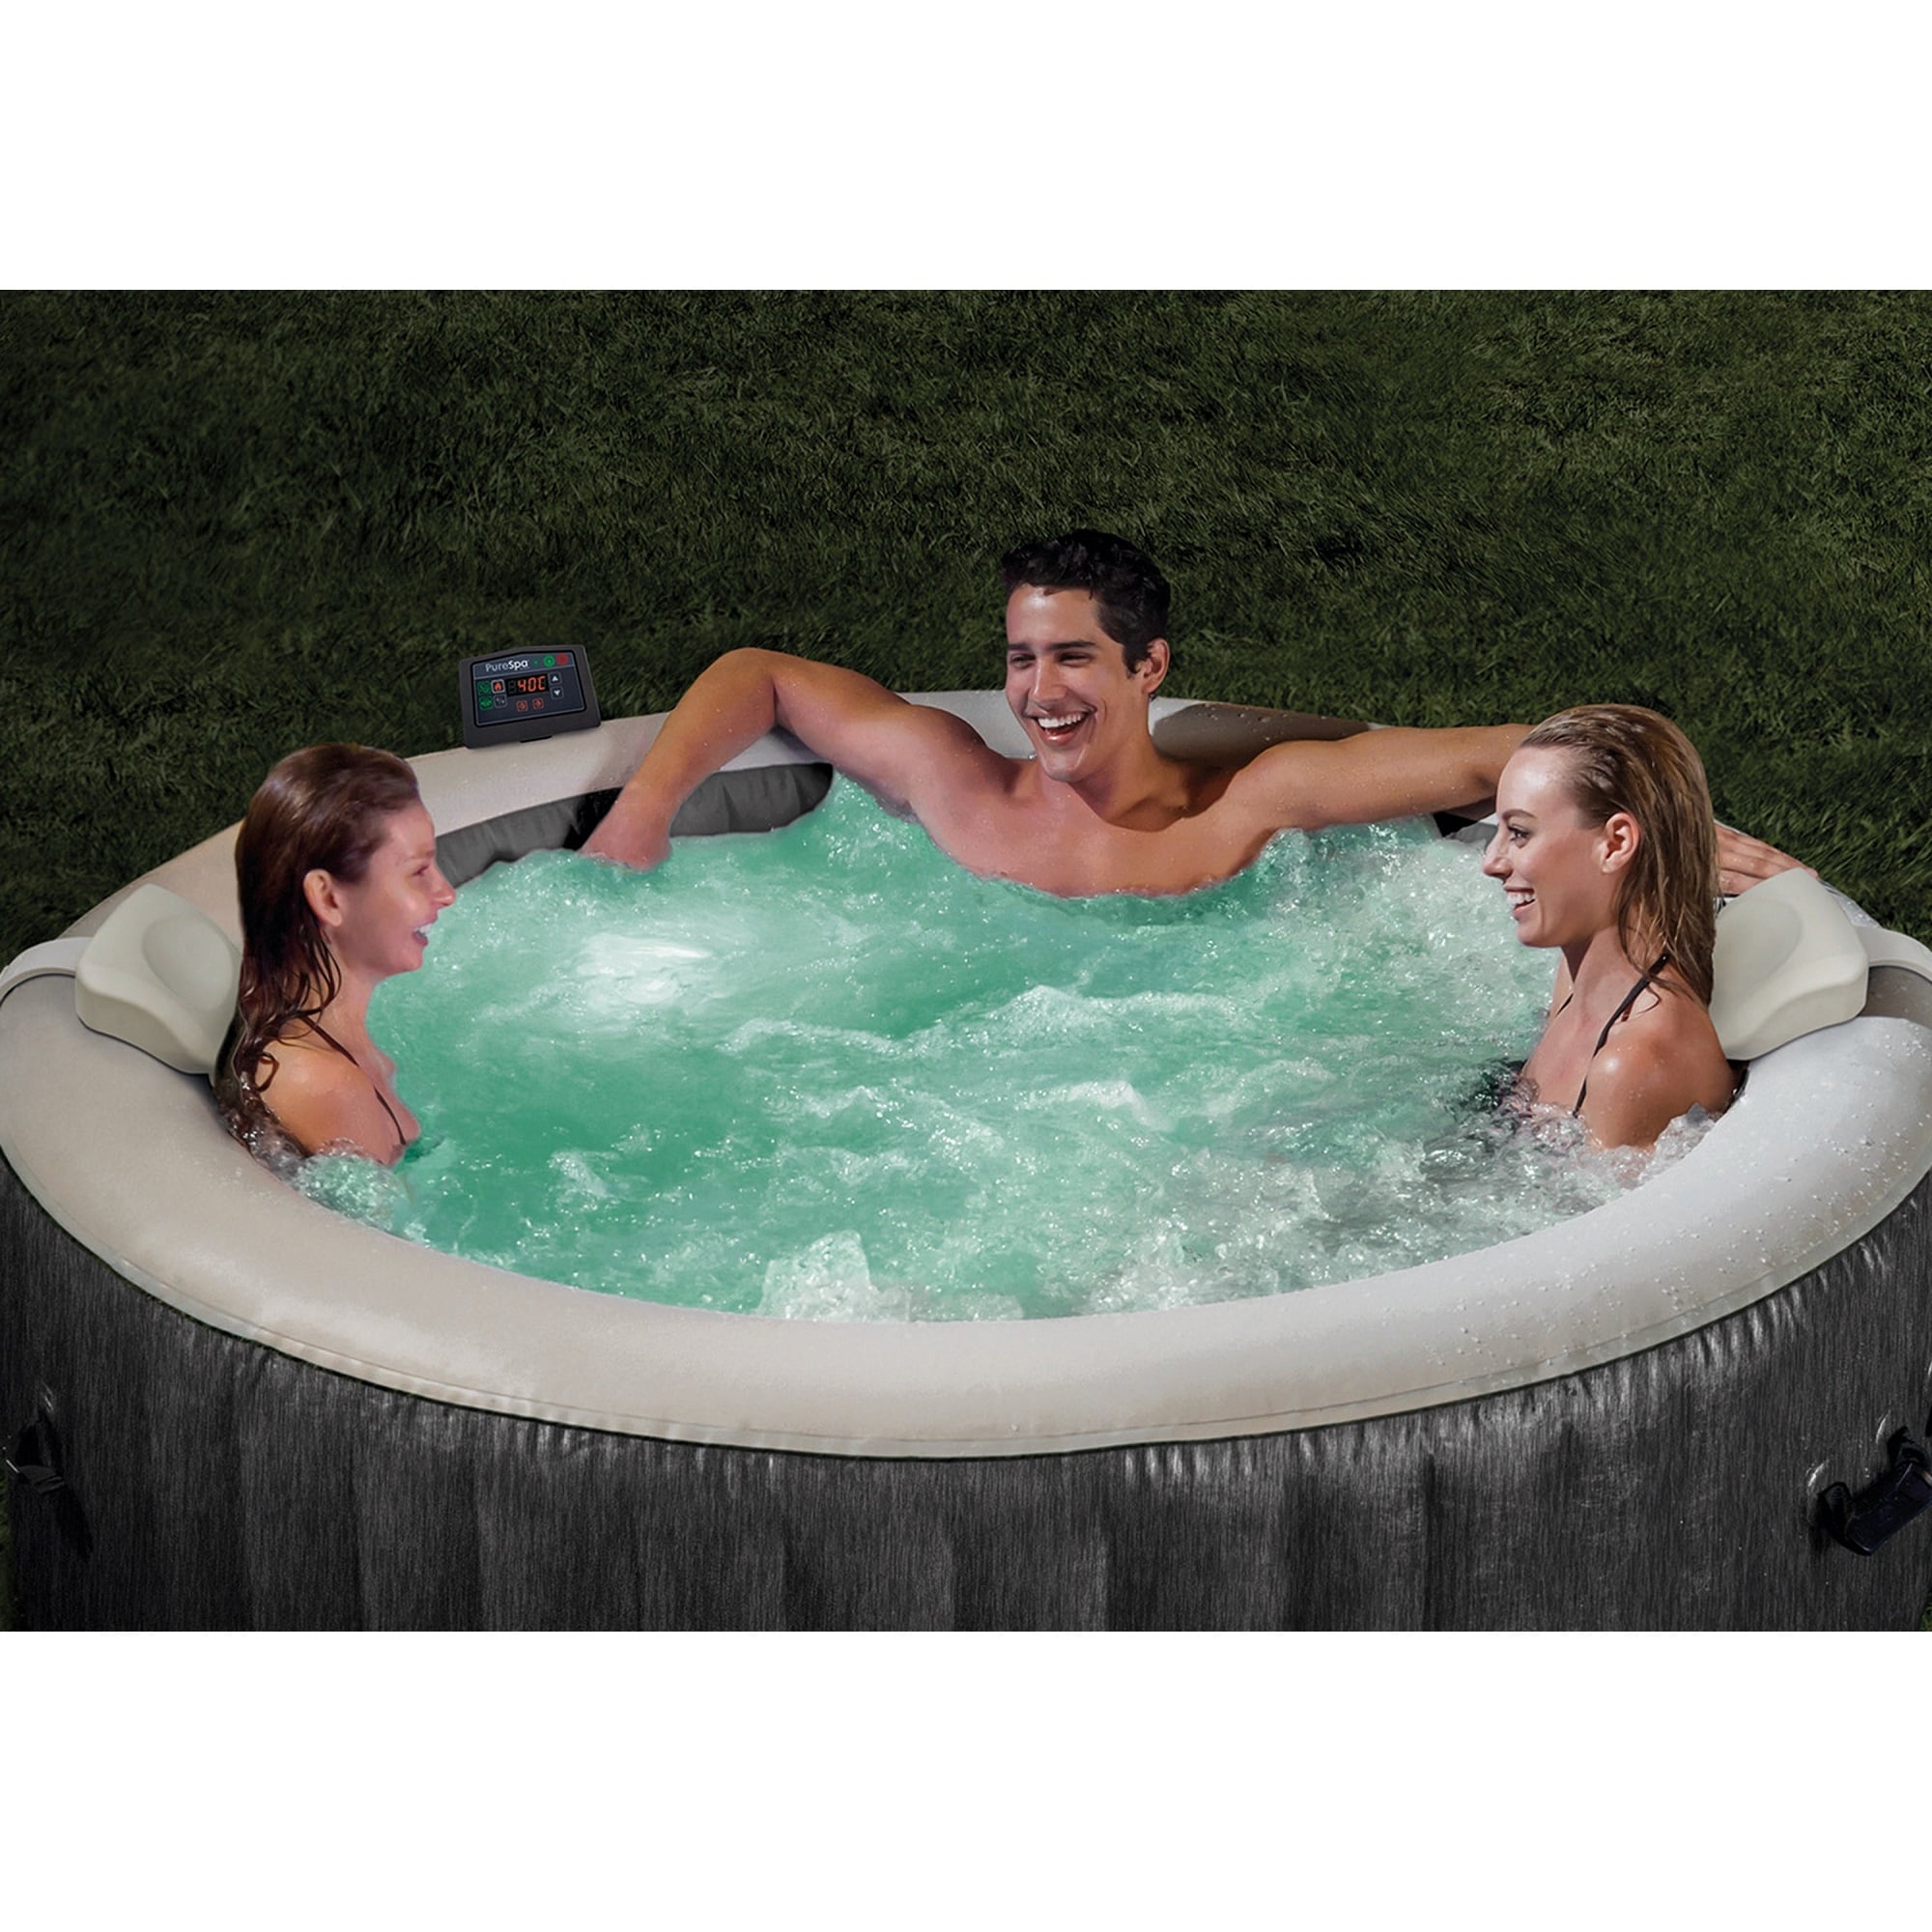 Intex 28439E Greywood Deluxe Person Inflatable Hot Tub Bubble Jet Spa Kit  100 Bed Bath  Beyond 35732812